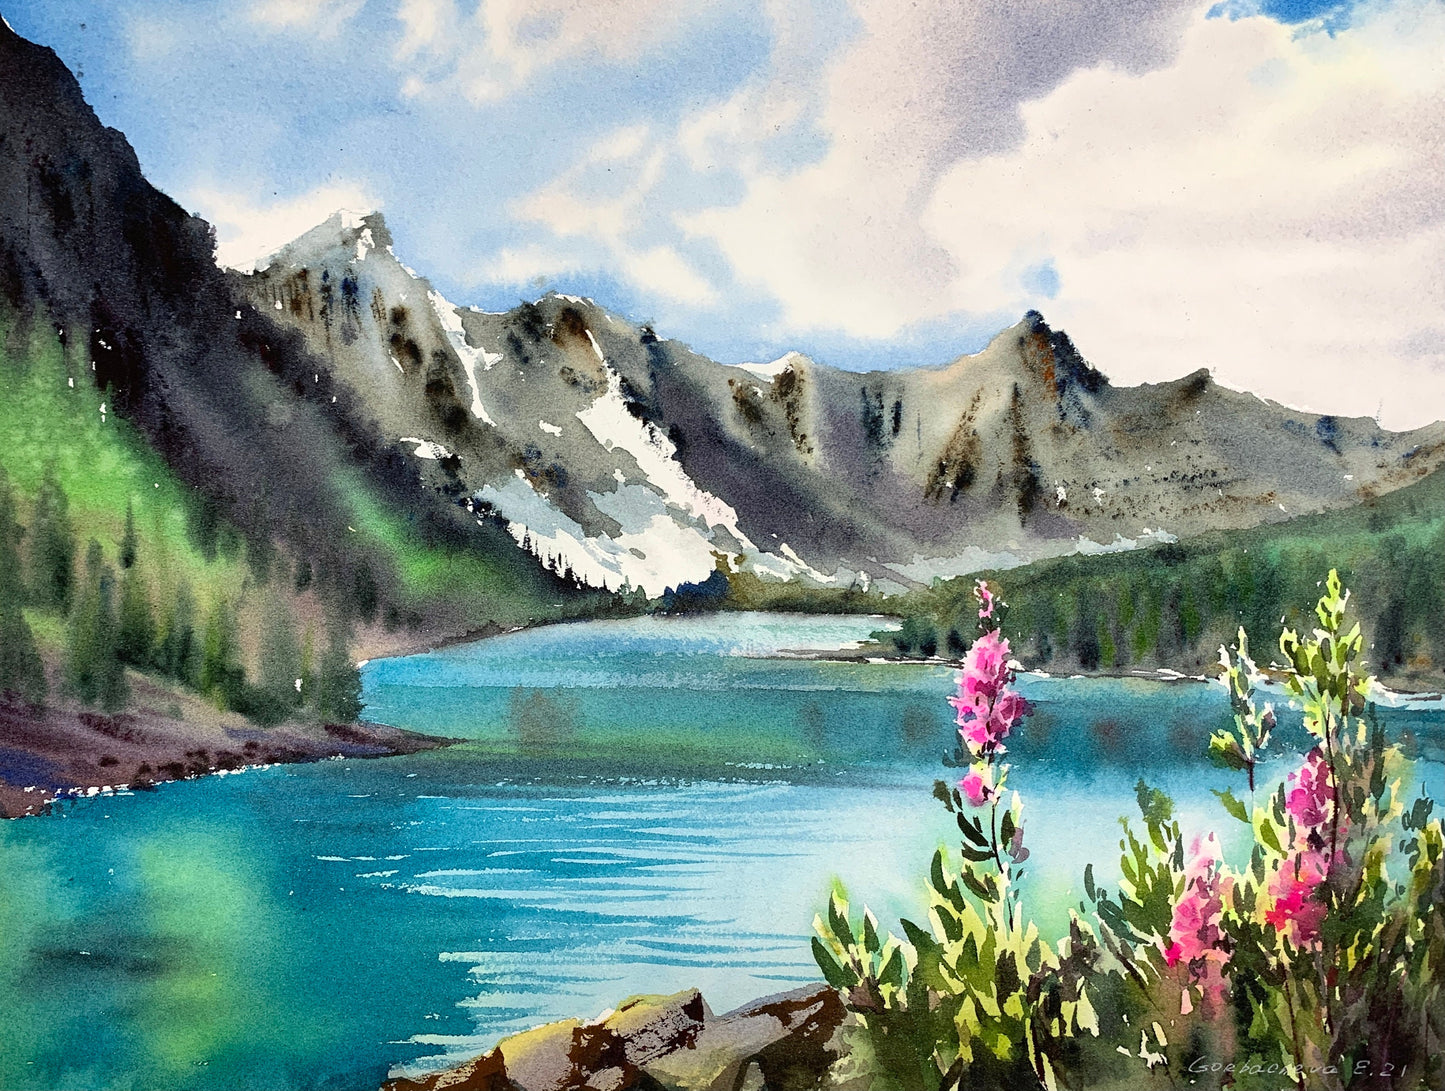 Turquoise Lake Painting Original, Watercolor Mountain, Landscape Wall Art, Mountains, Nature Decor, Wildflowers